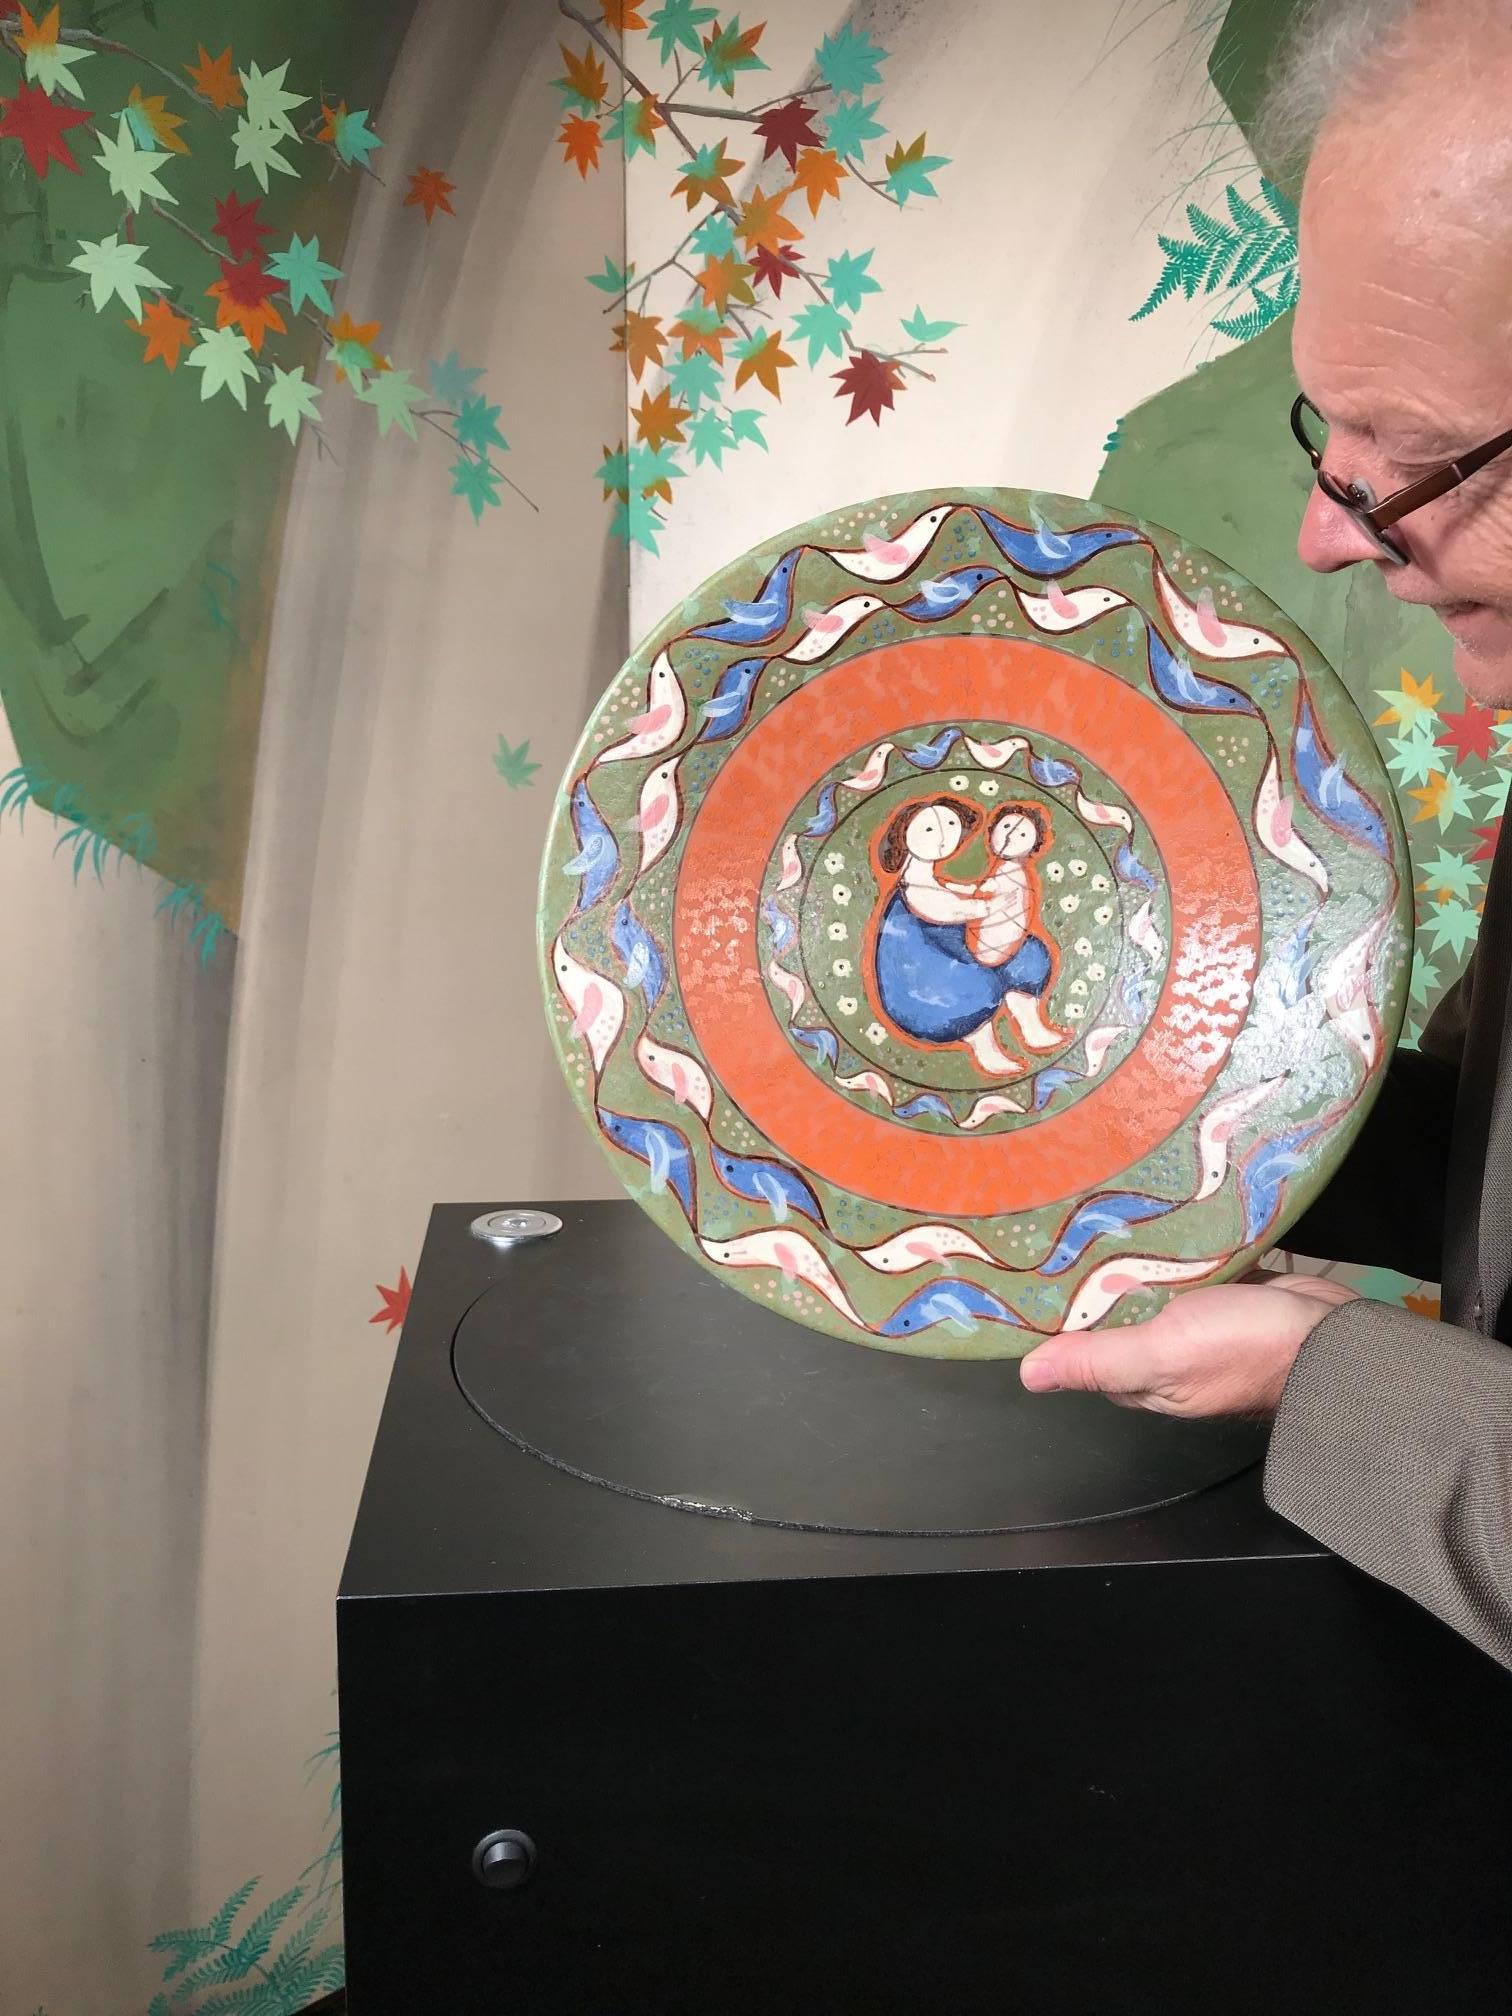 This is a wonderful handmade, hand-painted and hand glazed charger featuring a wonderful -Mother and Child- theme surrounded by birds. It was designed and hand painted by the now deceased master artisan Eva Fritz-Lindner working at the Karlruhe over